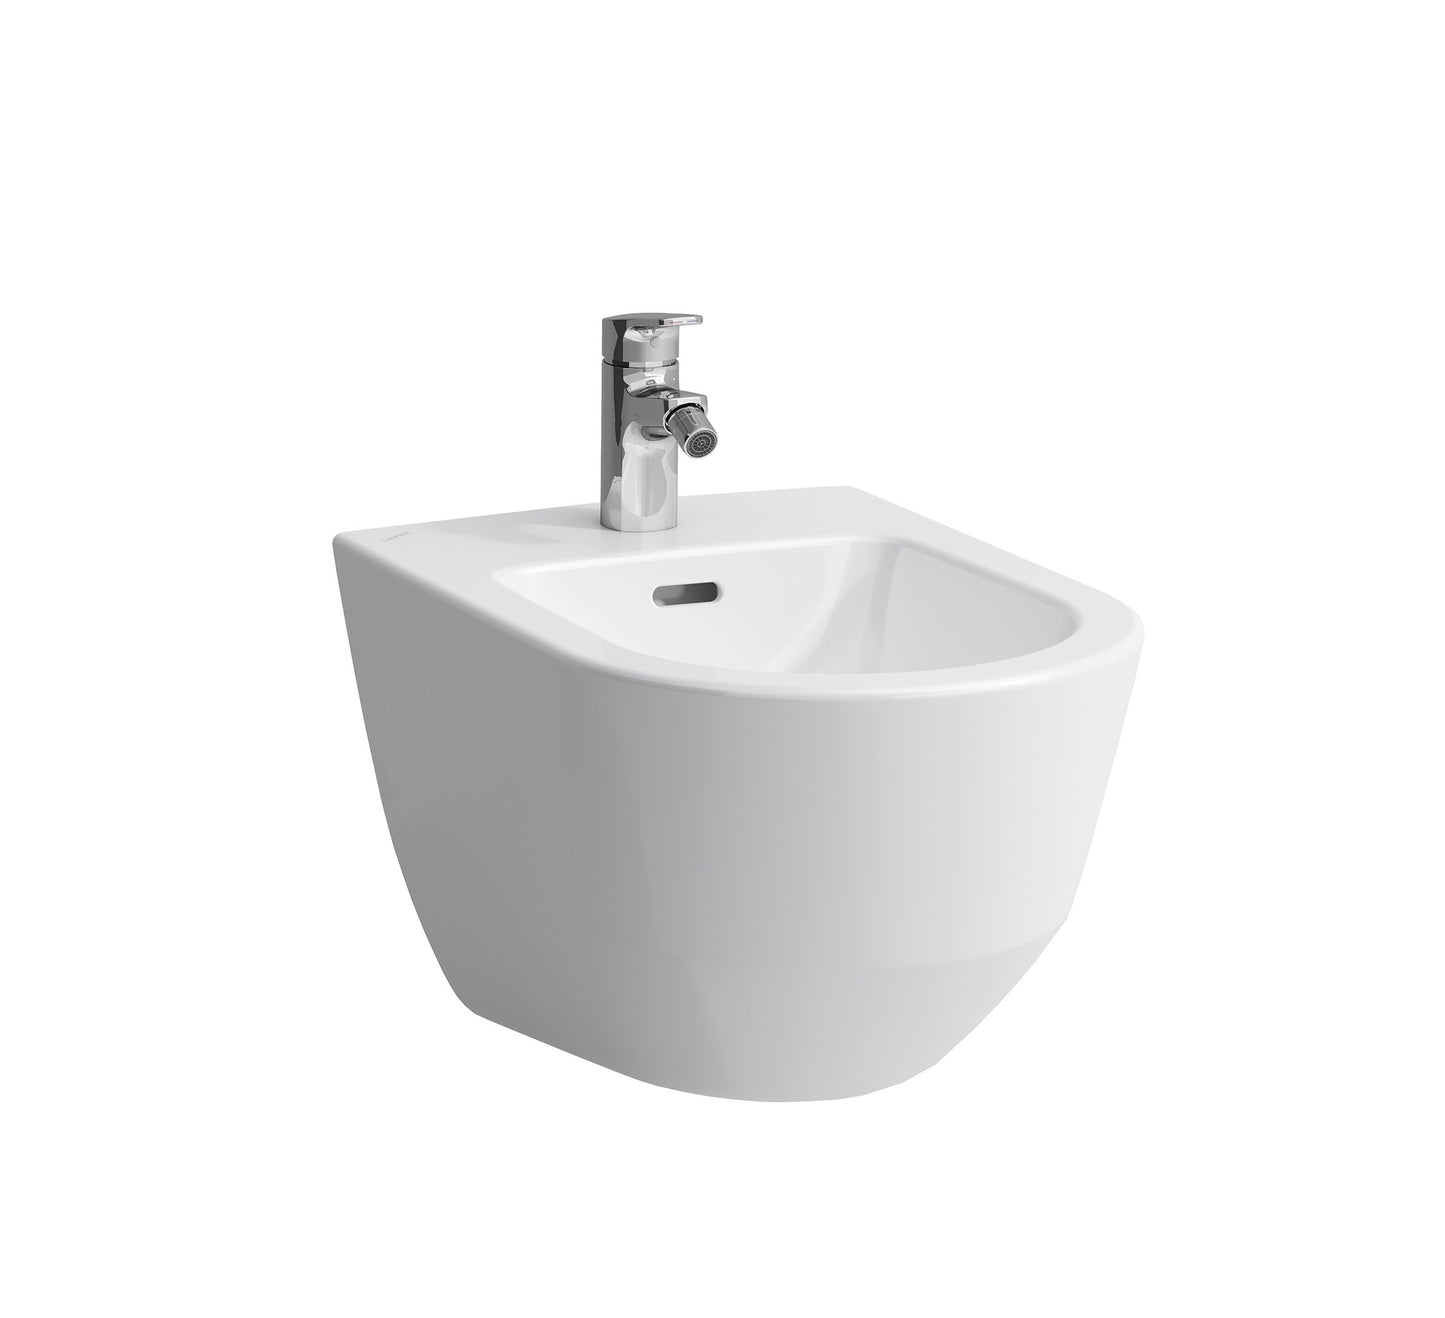 LAUFEN PRO A BIDET, WALL HUNG WITH TAPHOLE, WITH OVERFLOW HOLE WHITE - 8.3095.2.000.302.1 - Tadmur Trading